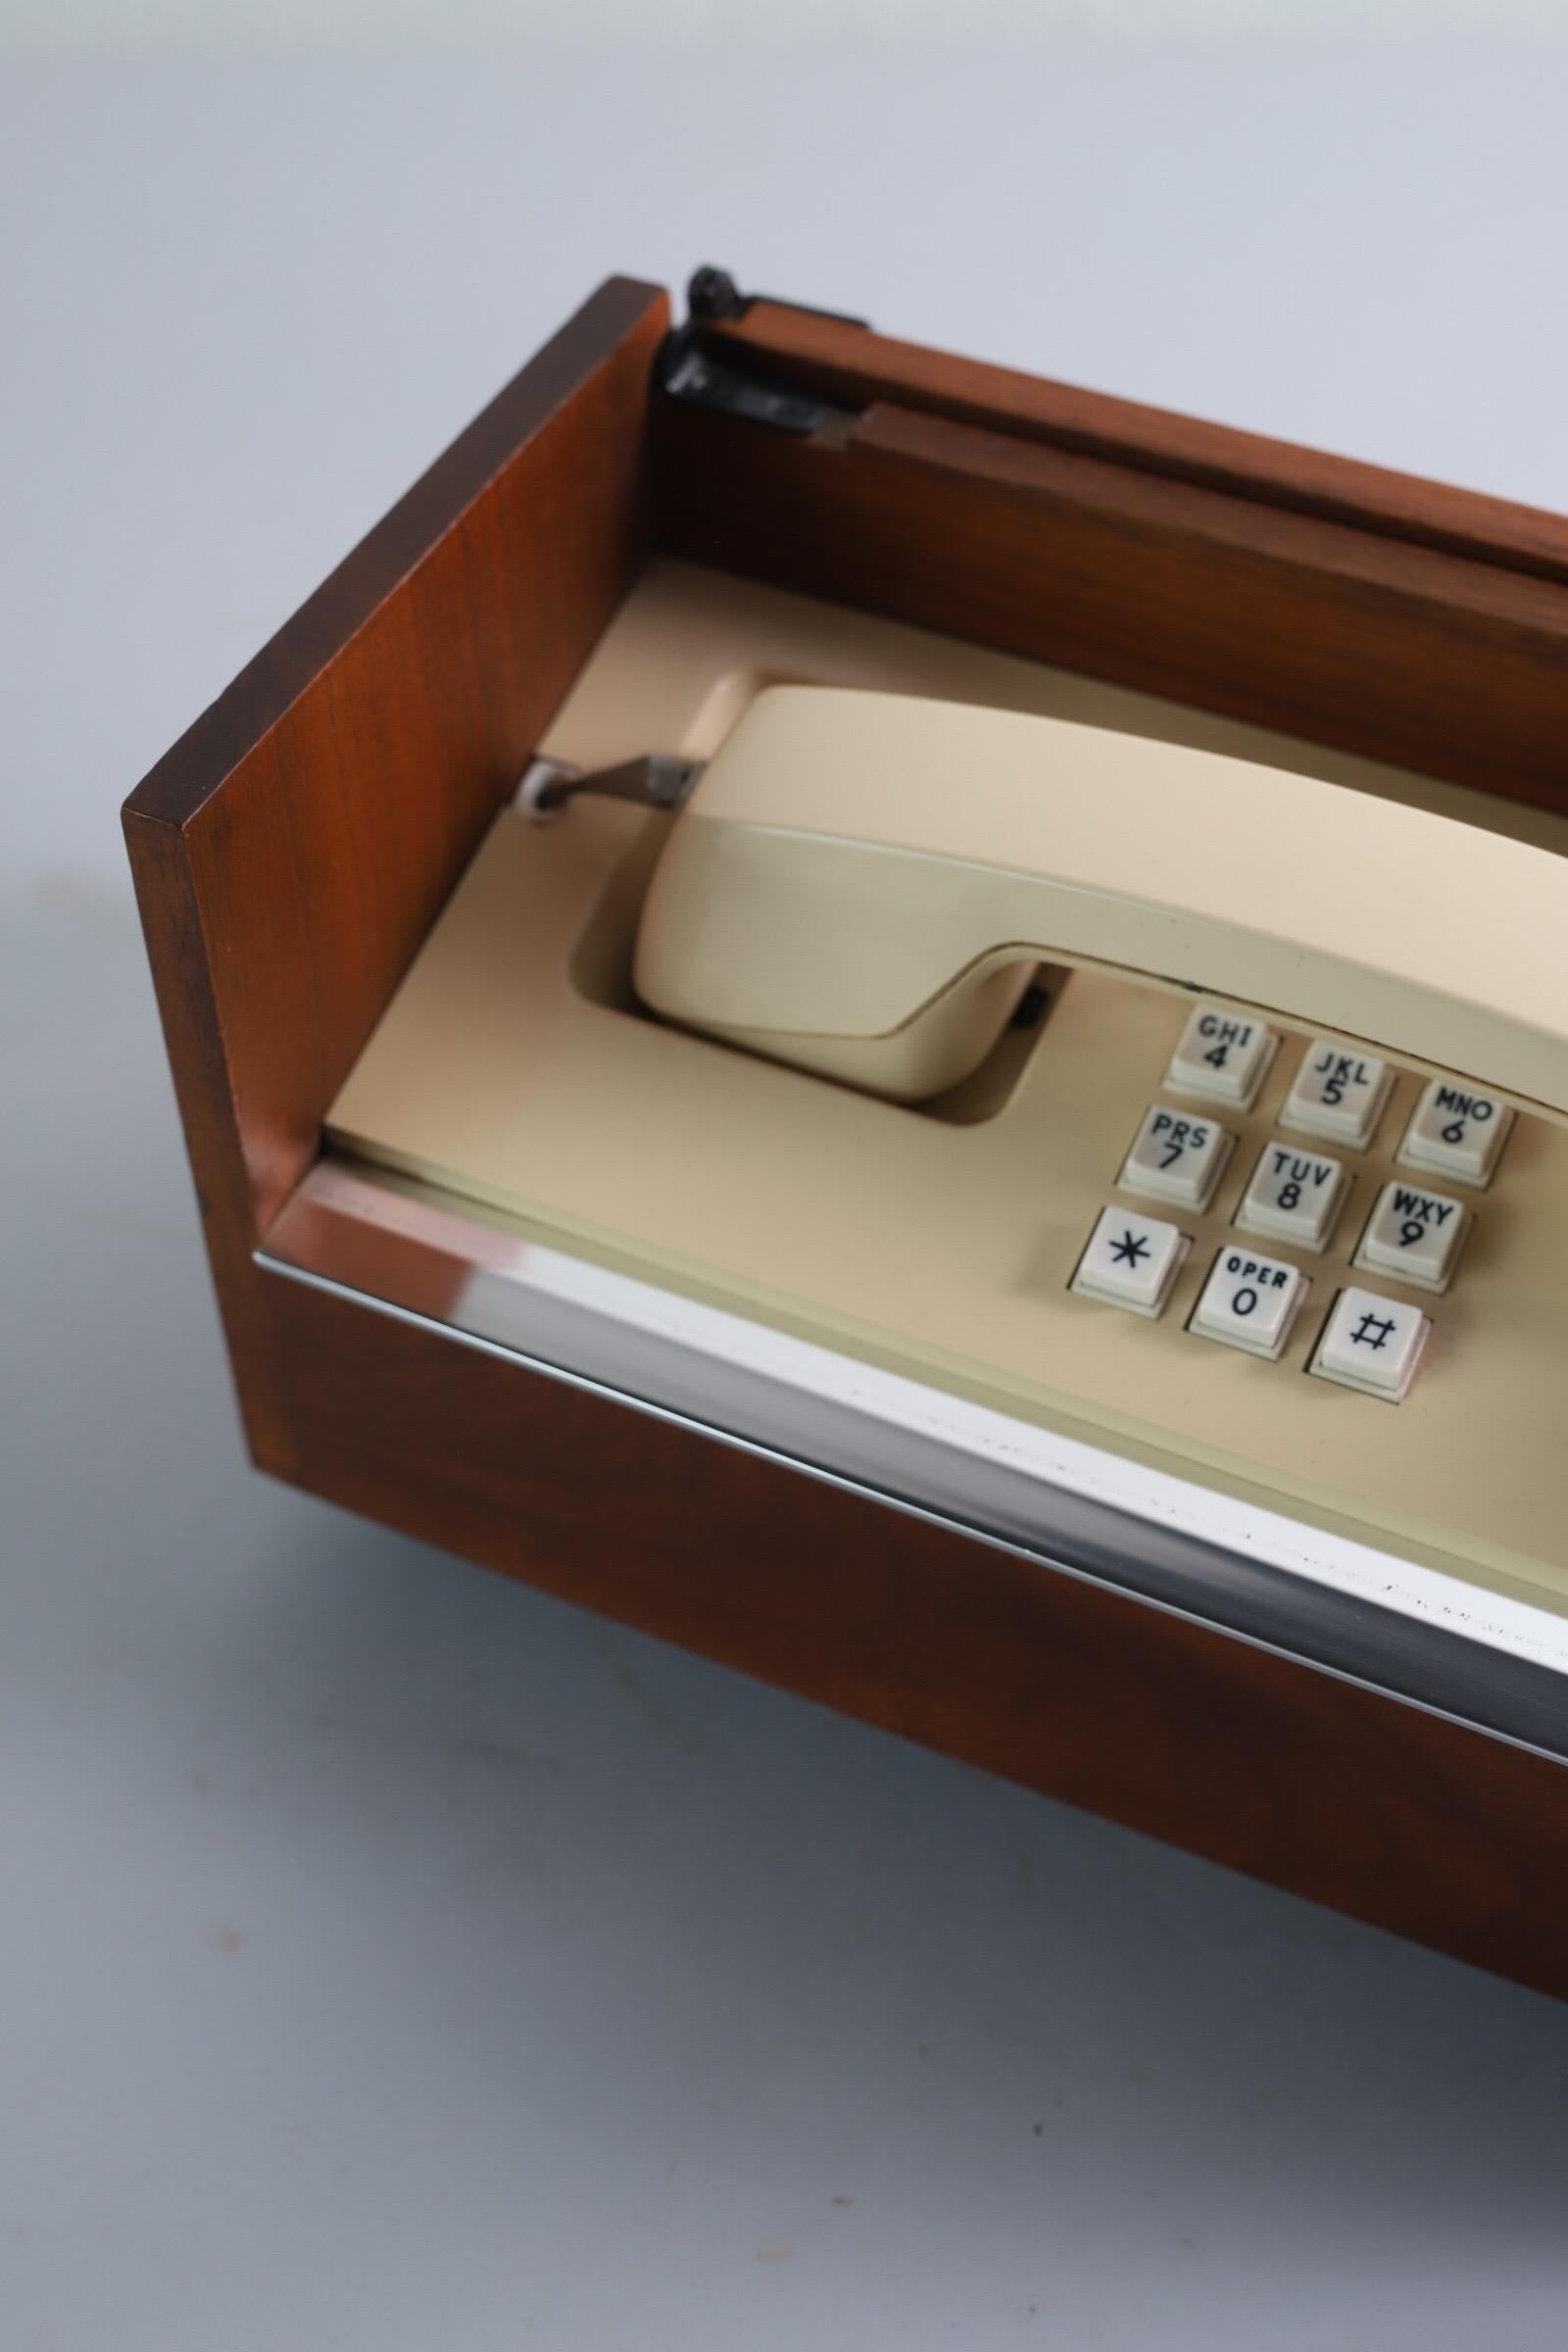 American 1970s General Electric Telephone